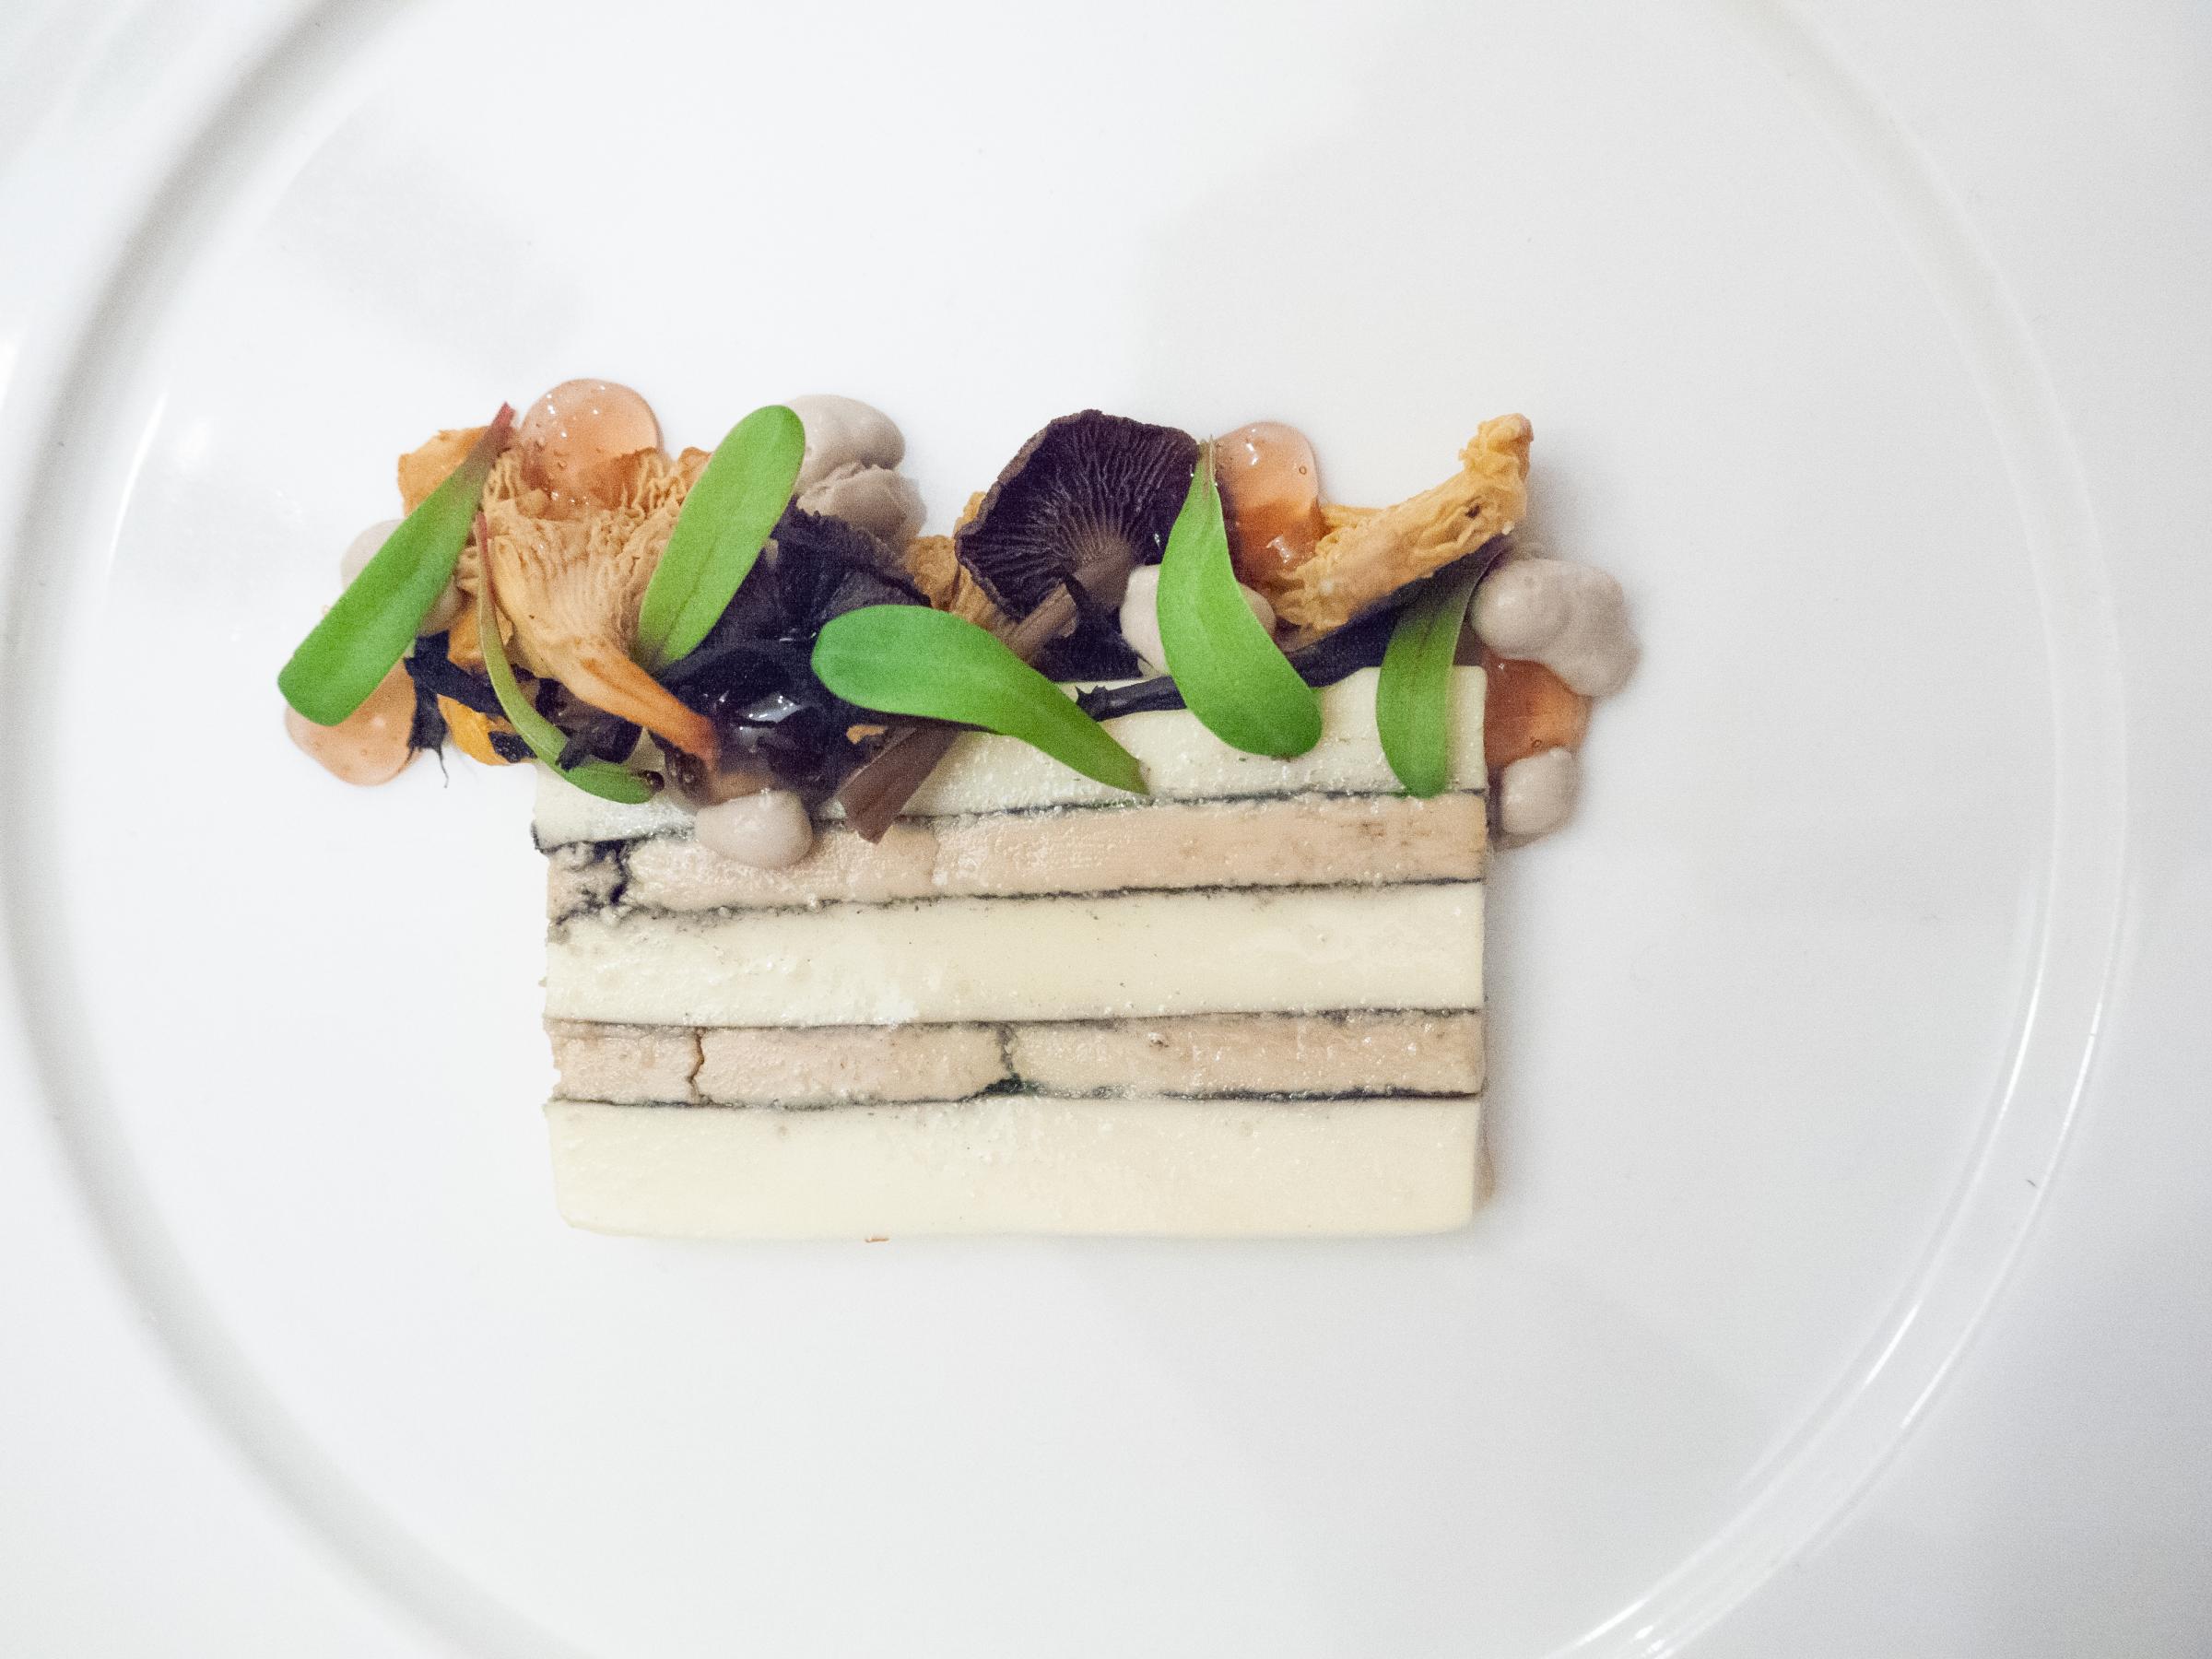 Food by Ross Marshall, at Holbeck Ghyll